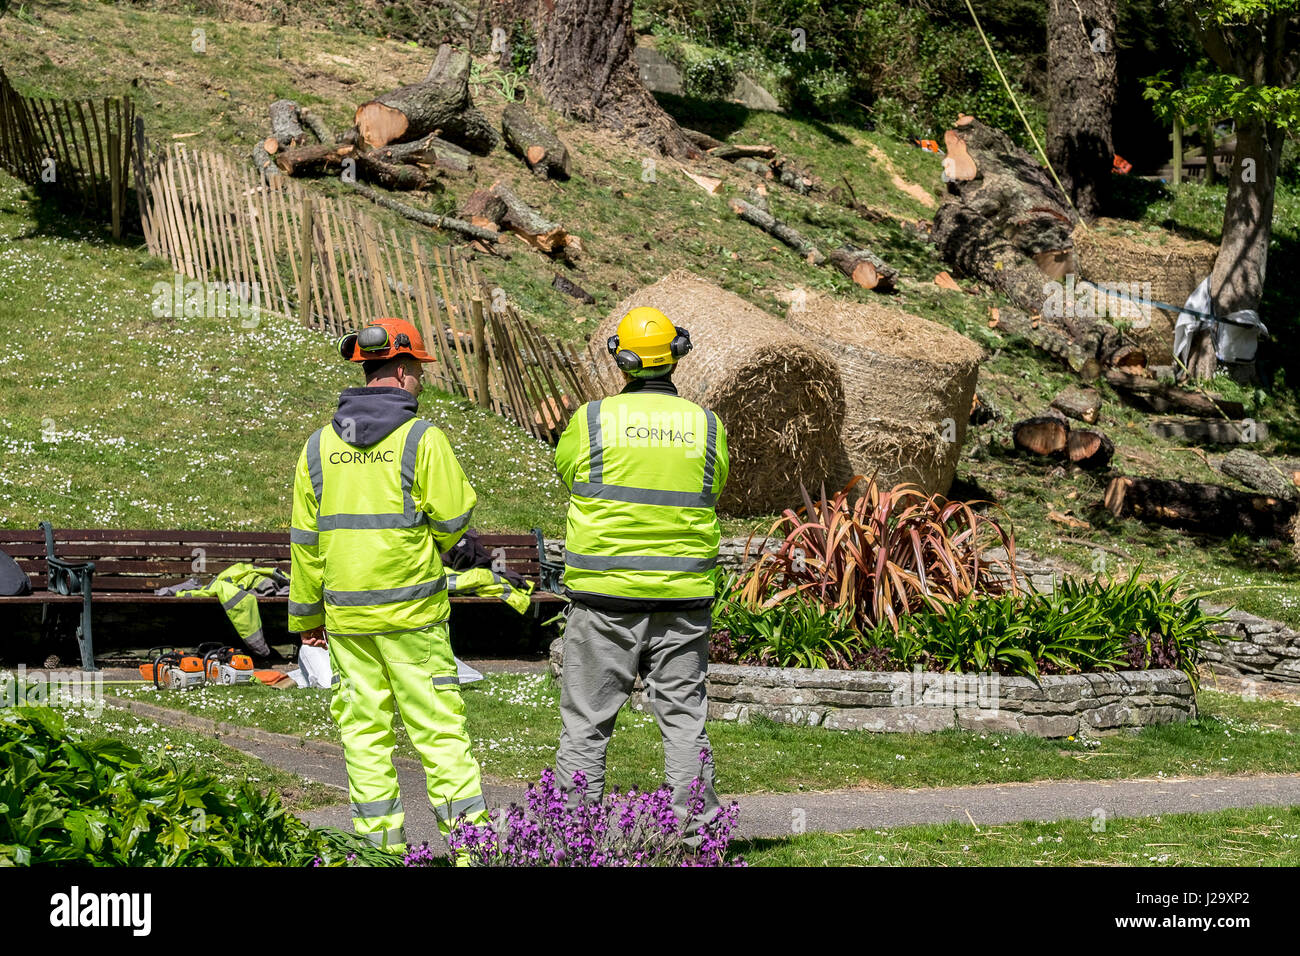 Cormac Workers Safety workwear Protective workwear Arboriculture Team Supervising Outside Hi-viz workwear Stock Photo